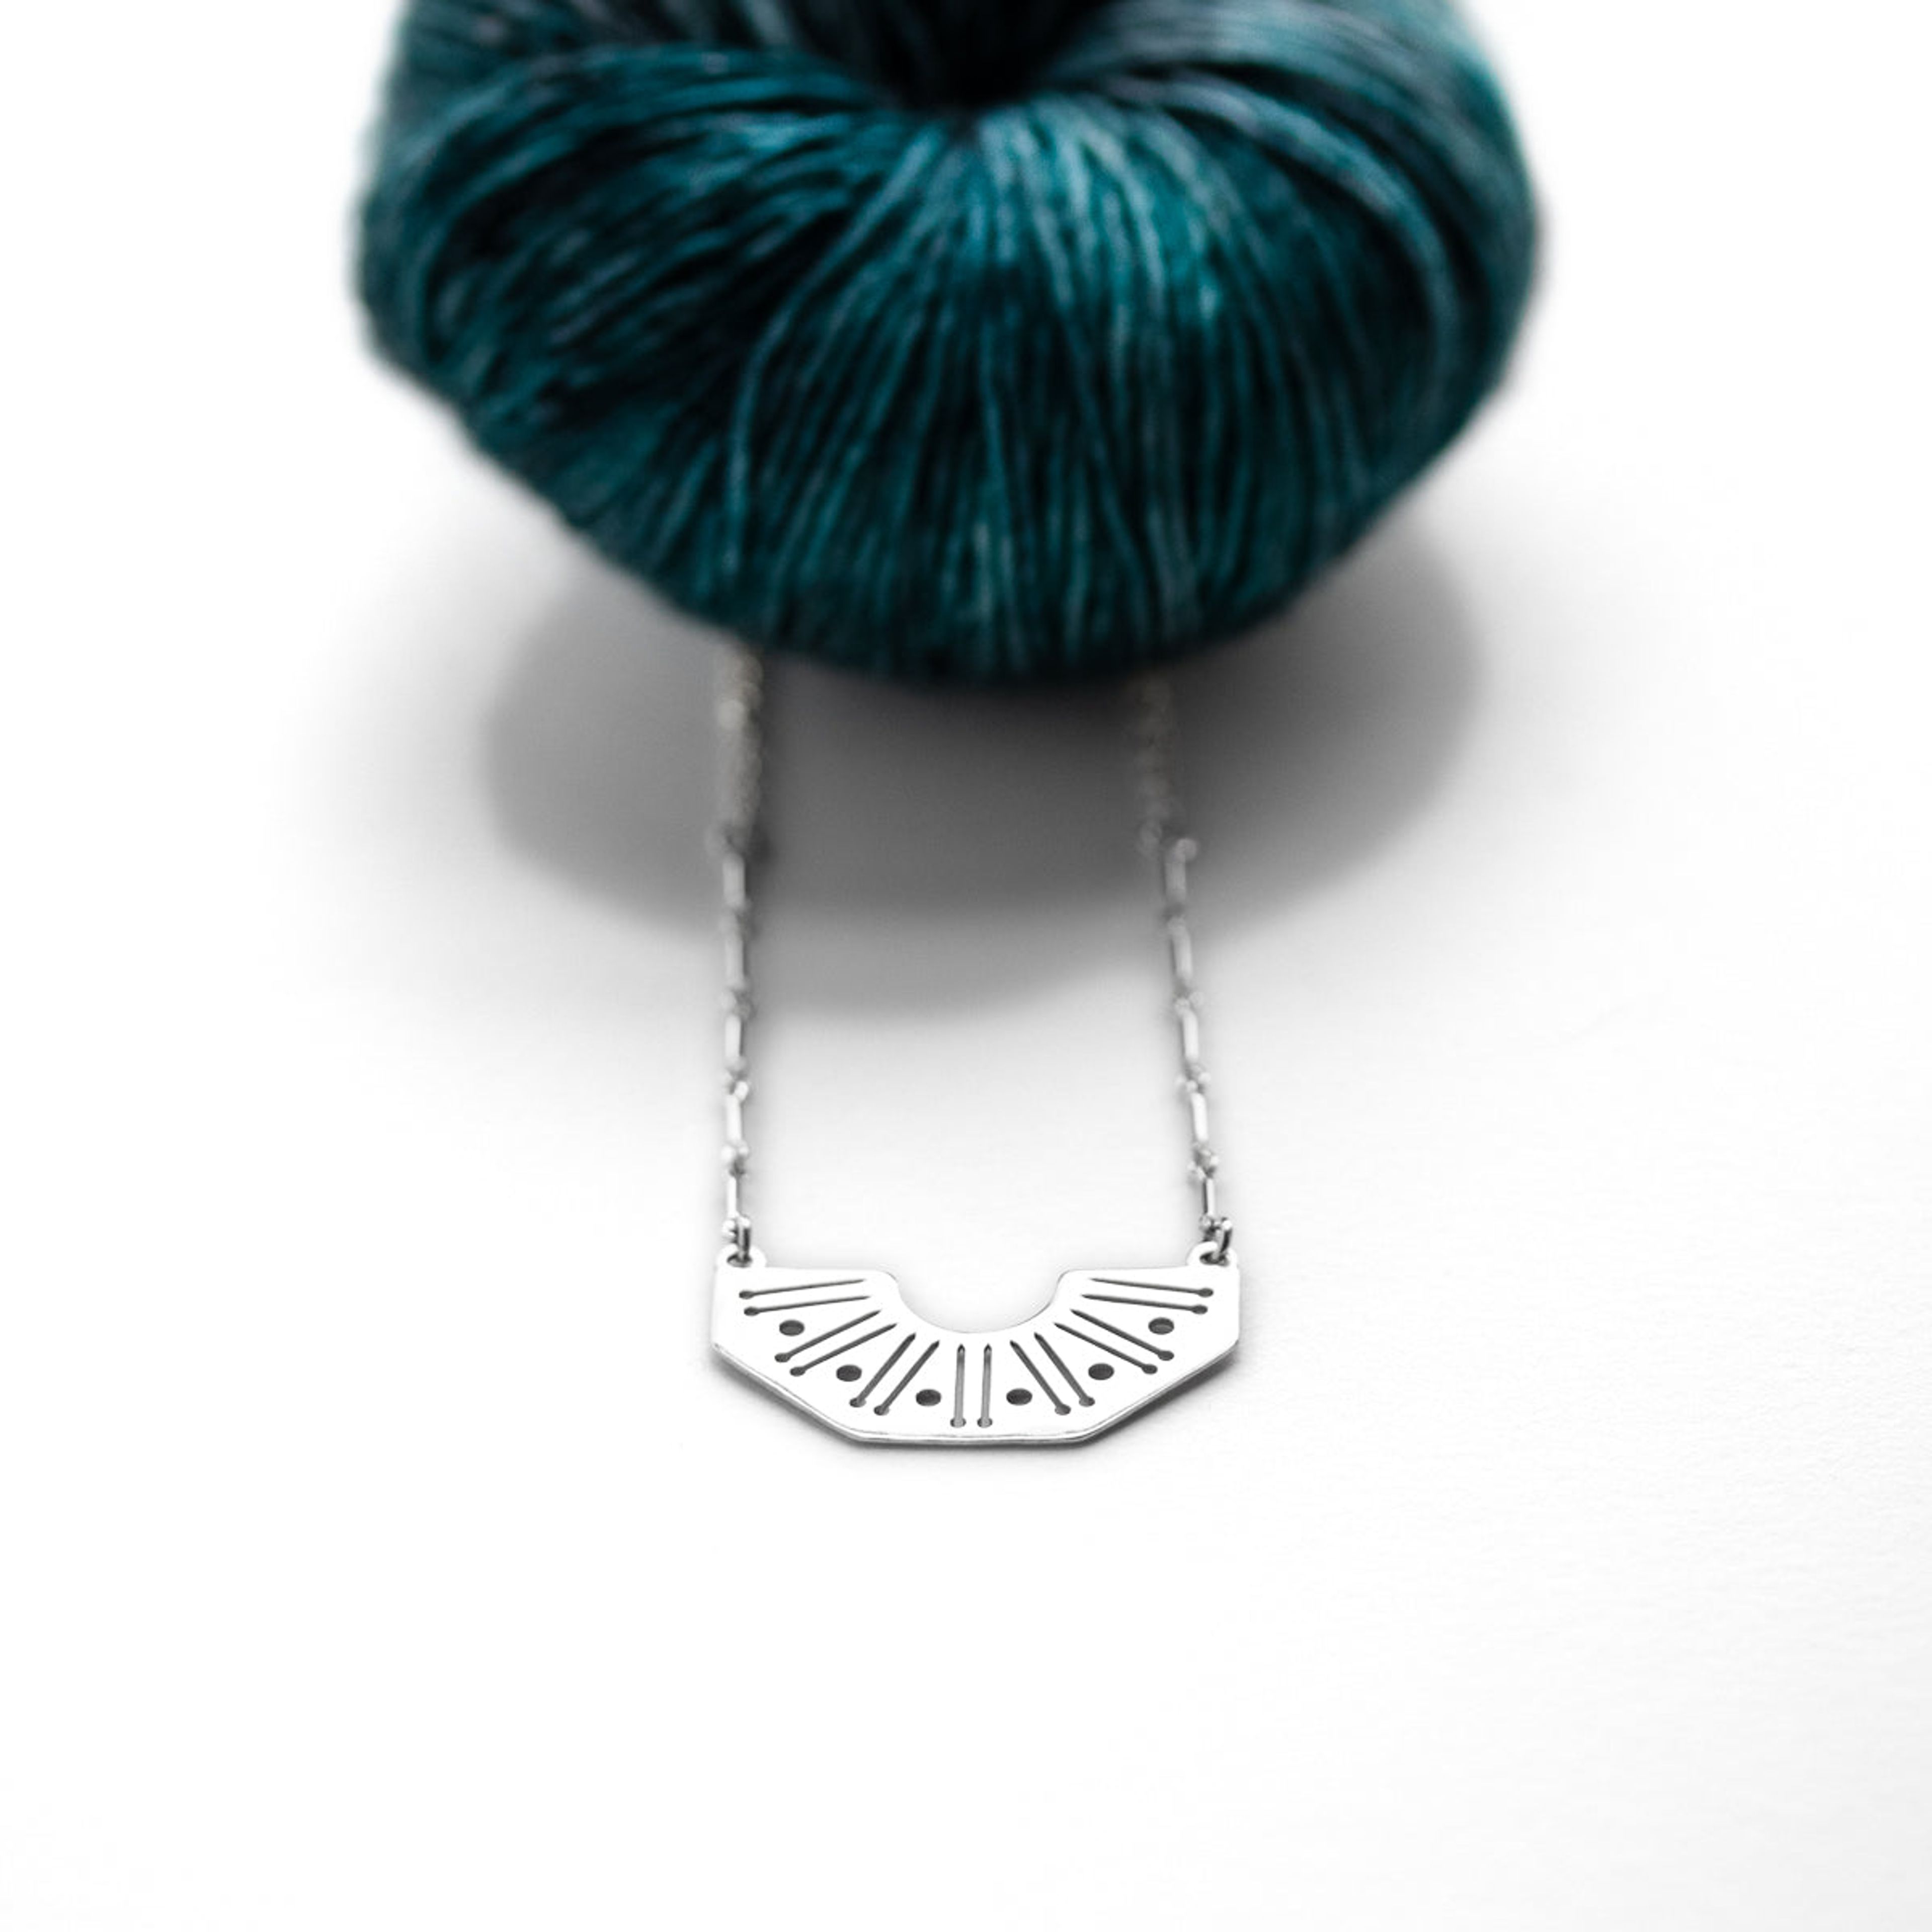 Knit and Dissent, RBG Collar If She Knitted!  Knitting Needles & Yarn Motif Necklace